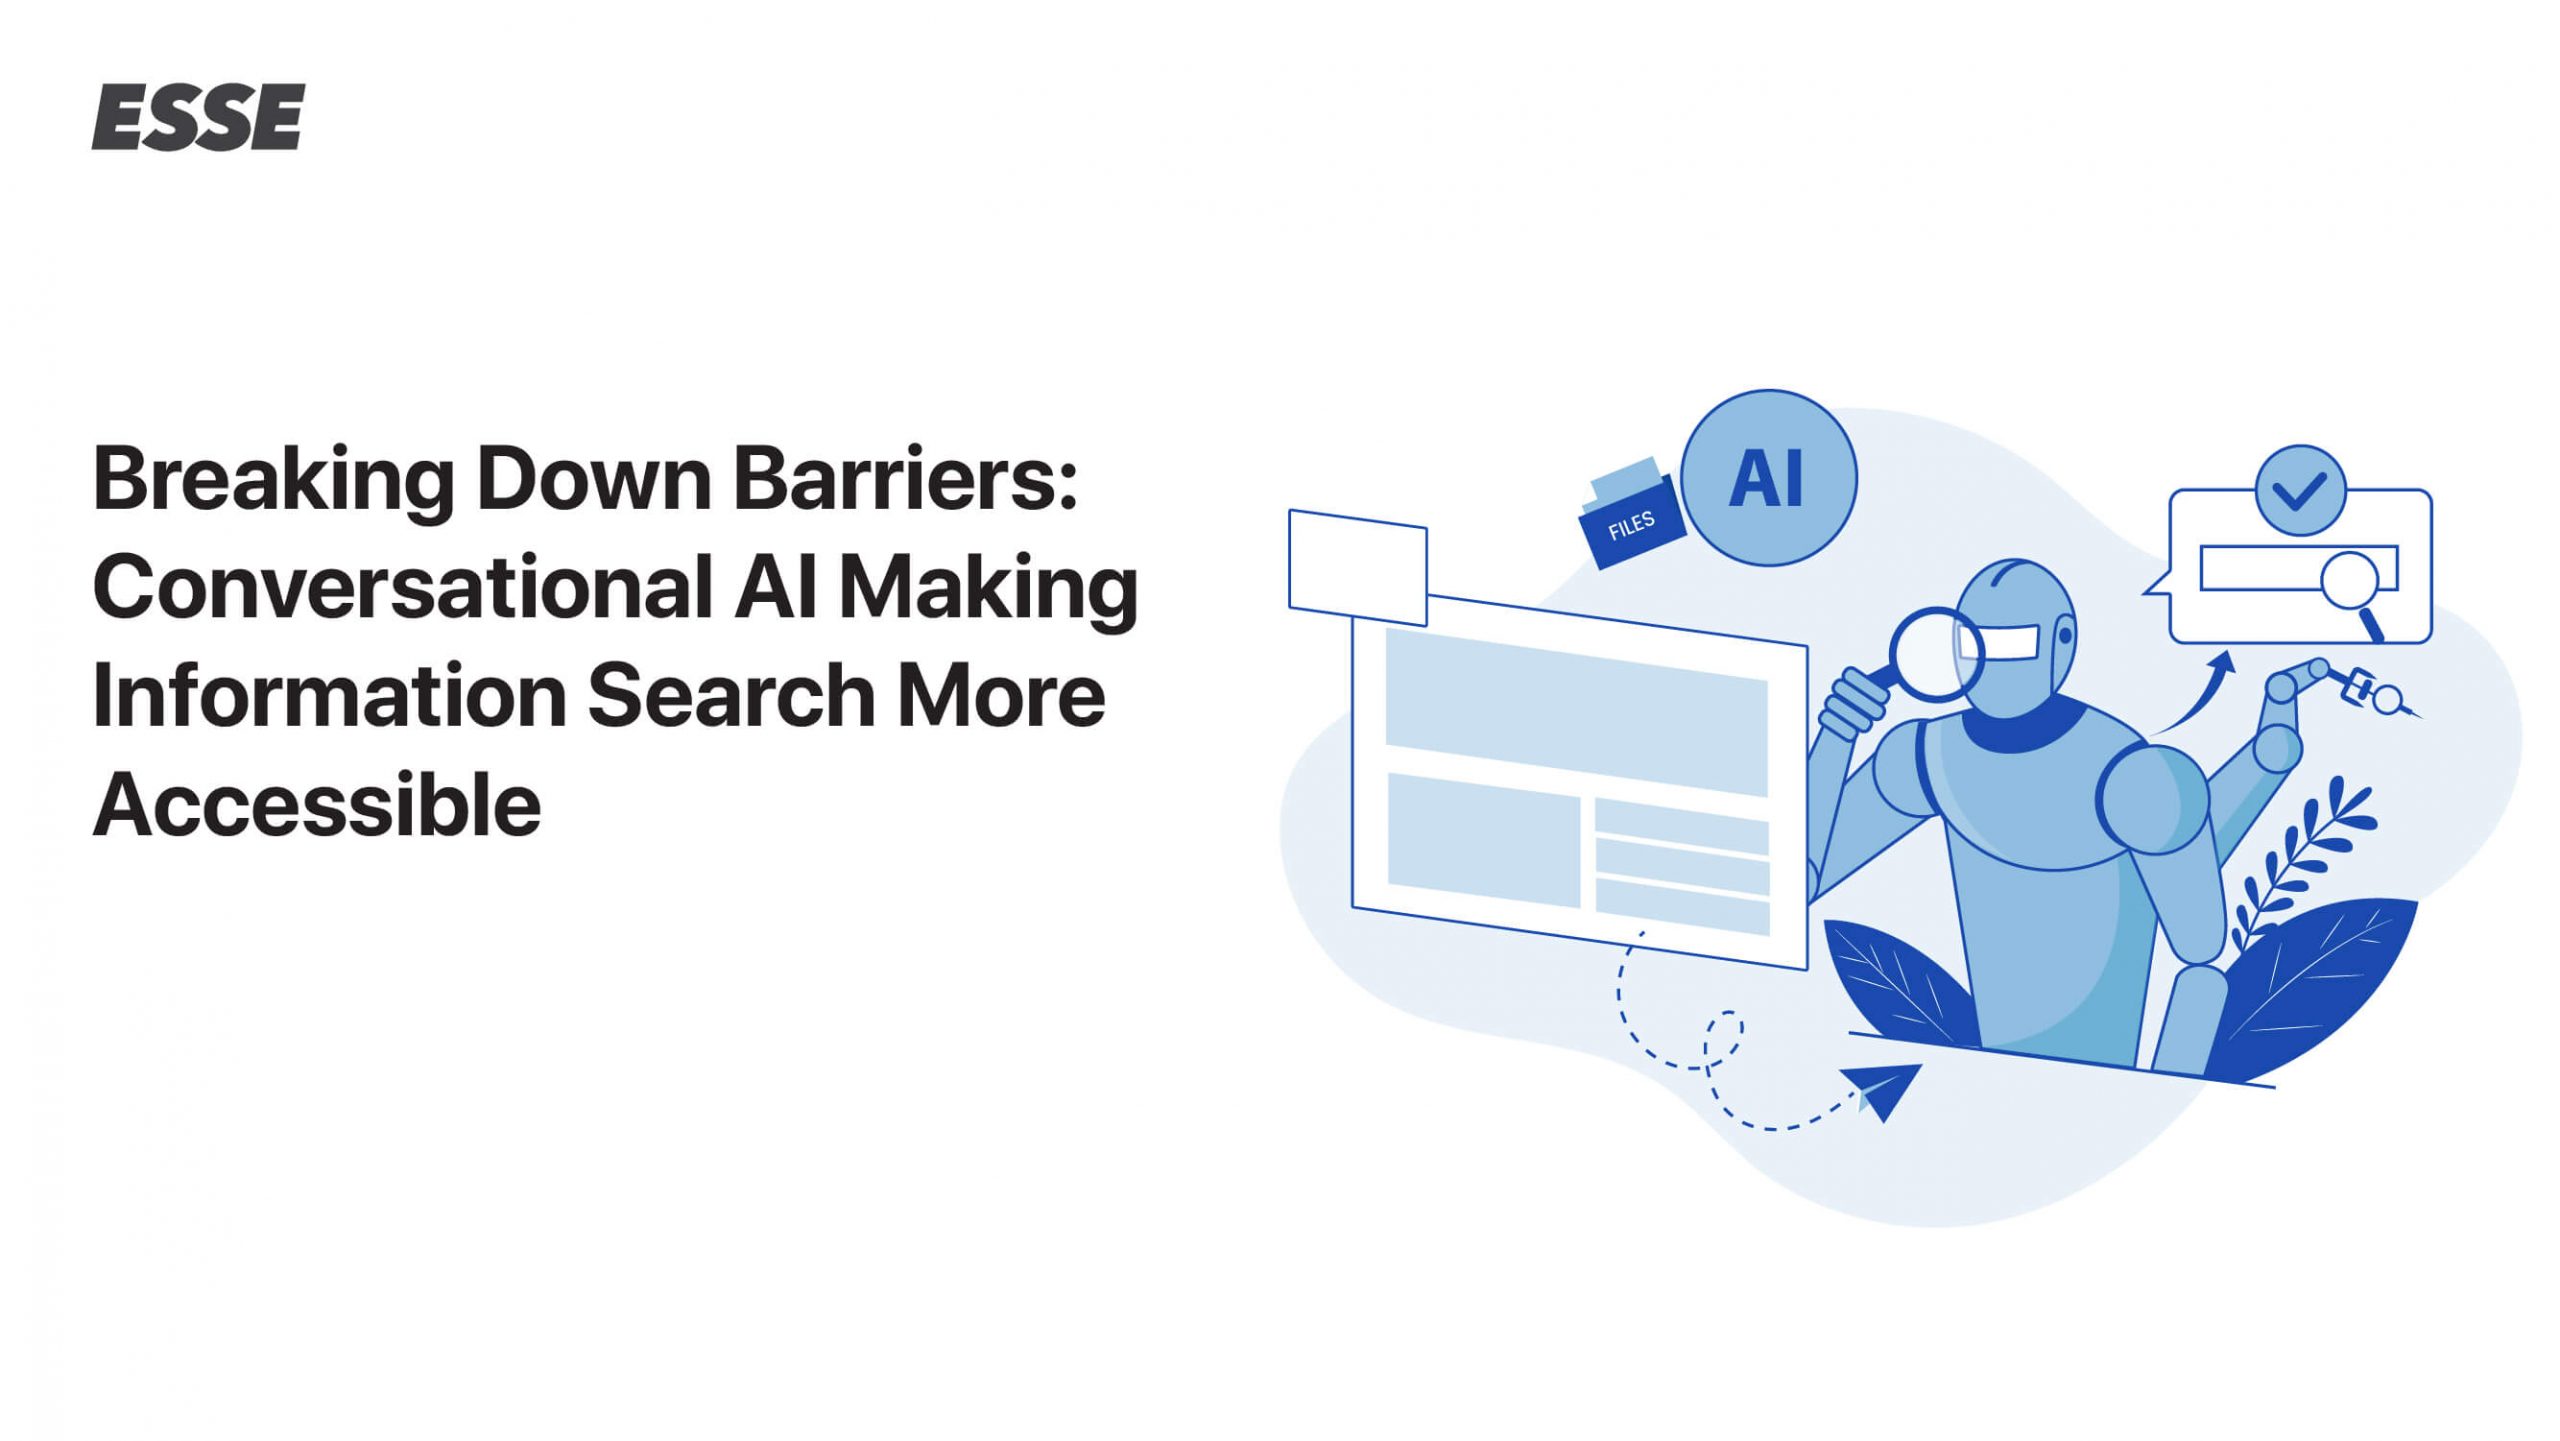 Breaking Down Barriers: Conversational AI Making Information Search More Accessible